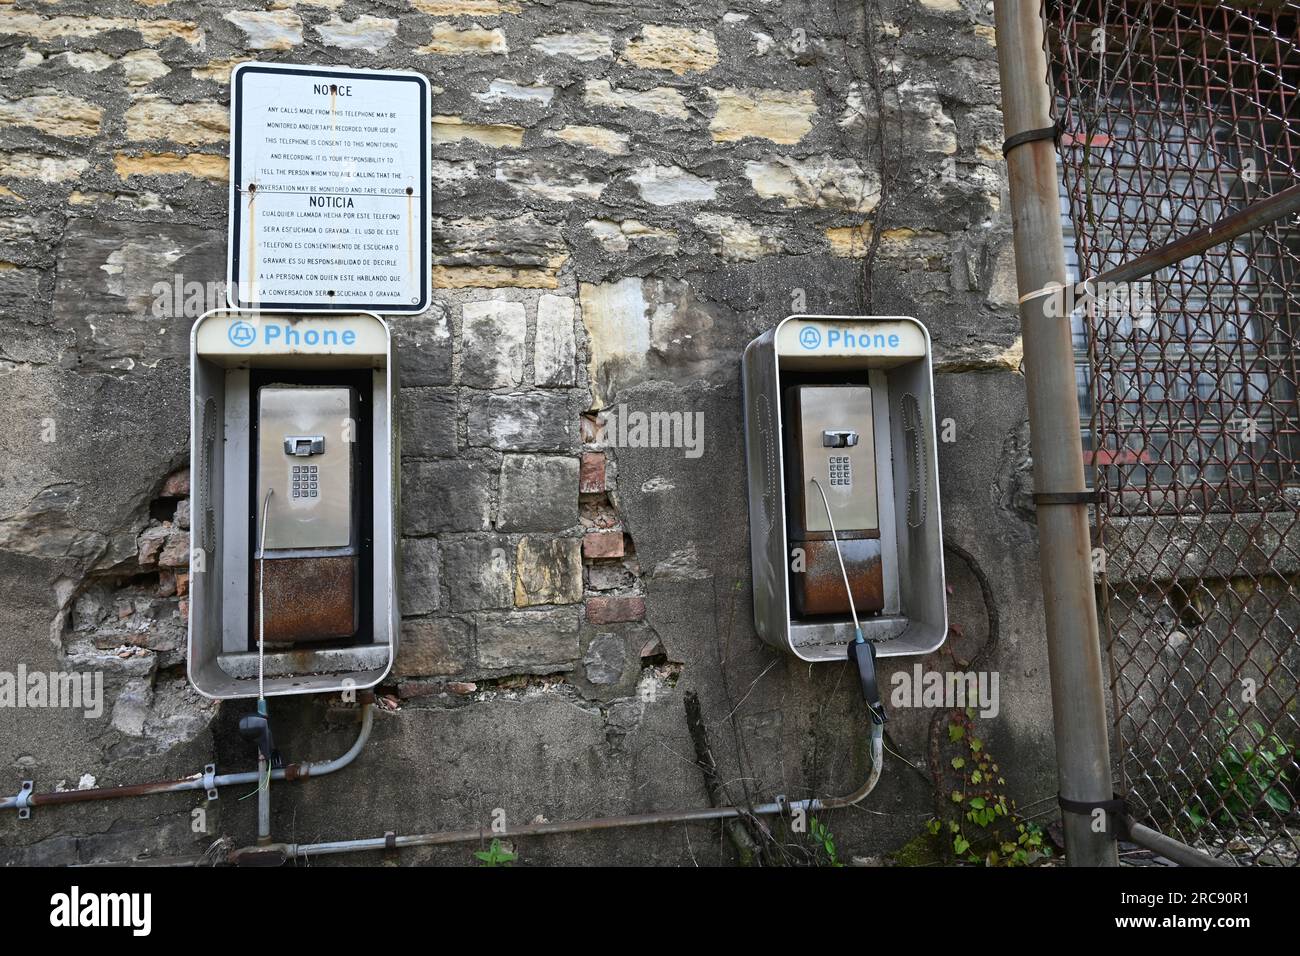 Remains of old inmate payphones in the yard at the Old Joliet Prison, which opened in 1858 and was closed and abandon in 2002. Stock Photo